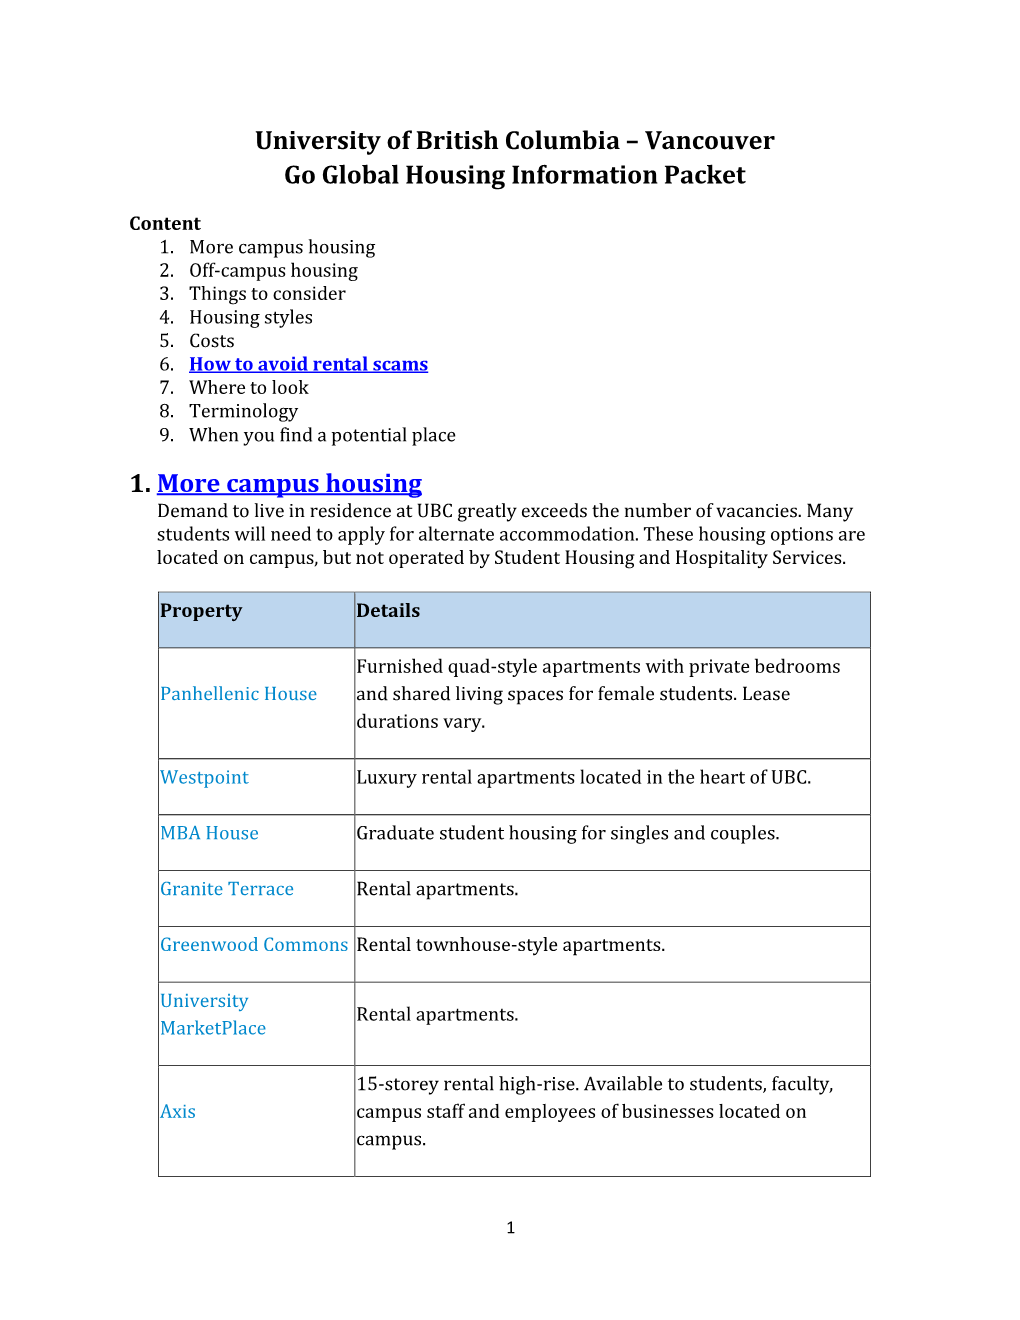 Vancouver Go Global Housing Information Packet 1. More Campus